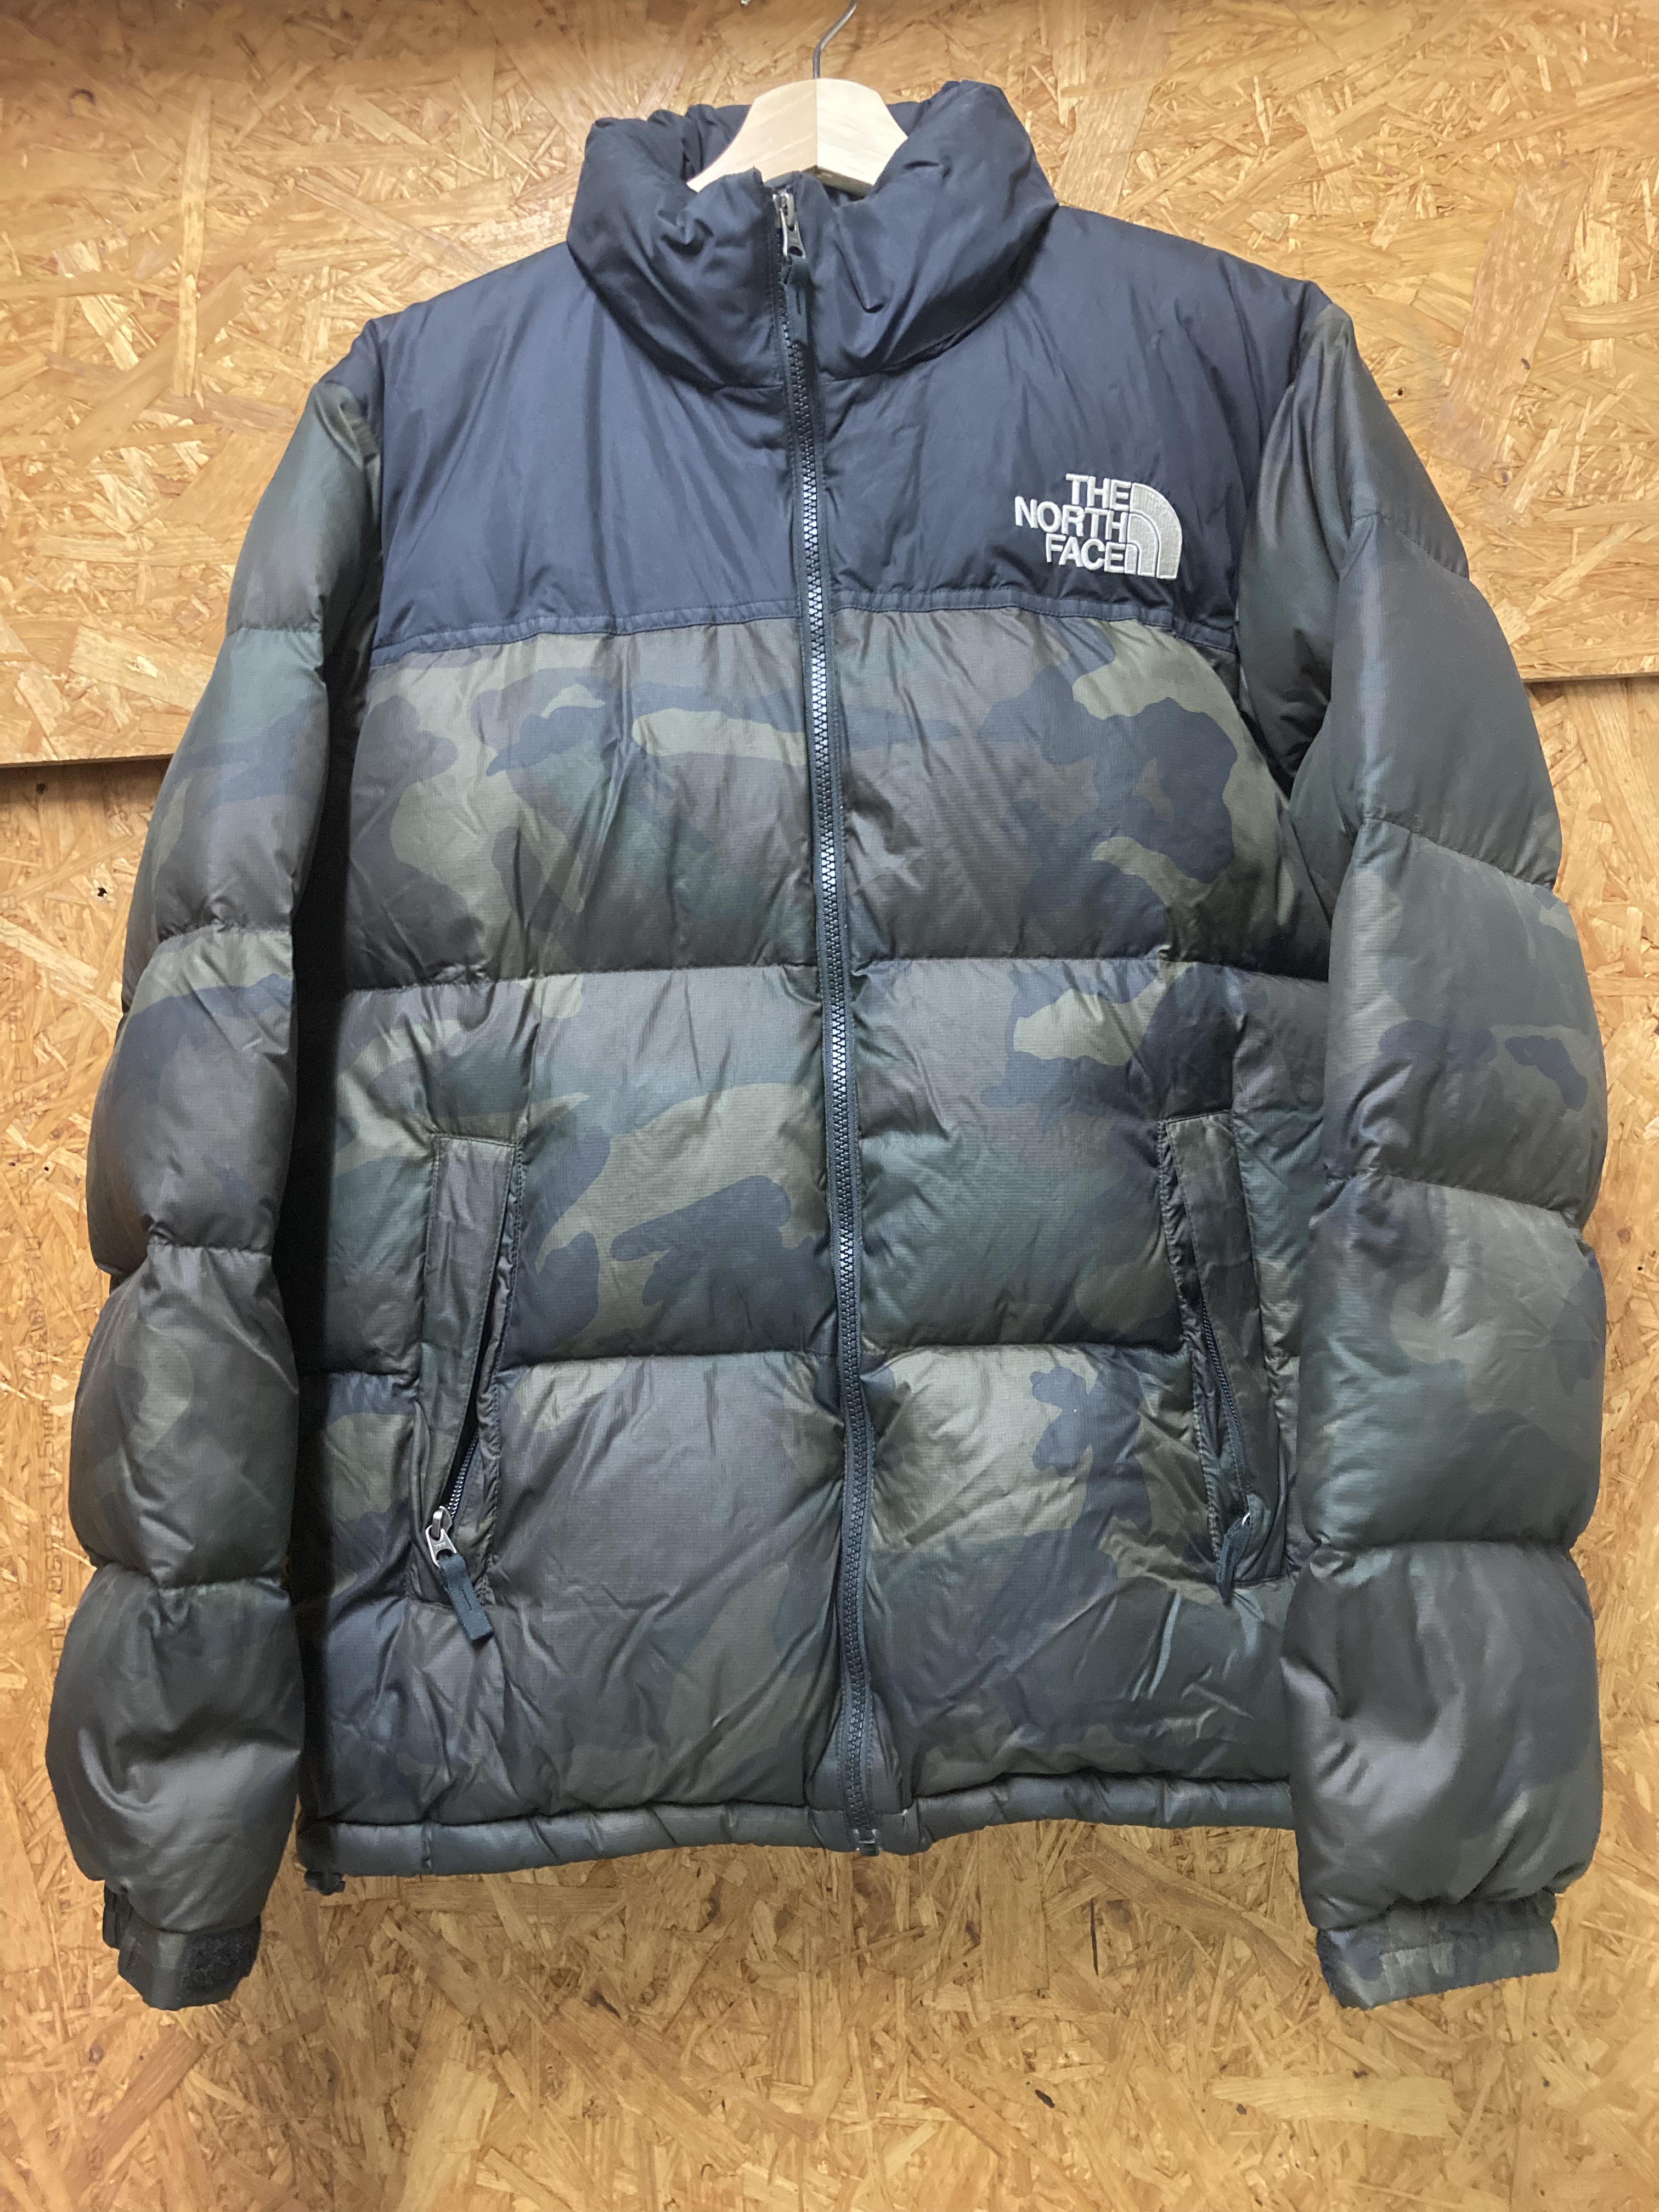 THE NORTH FACE  ヴィンテージ  700fill ヌプシ 90's